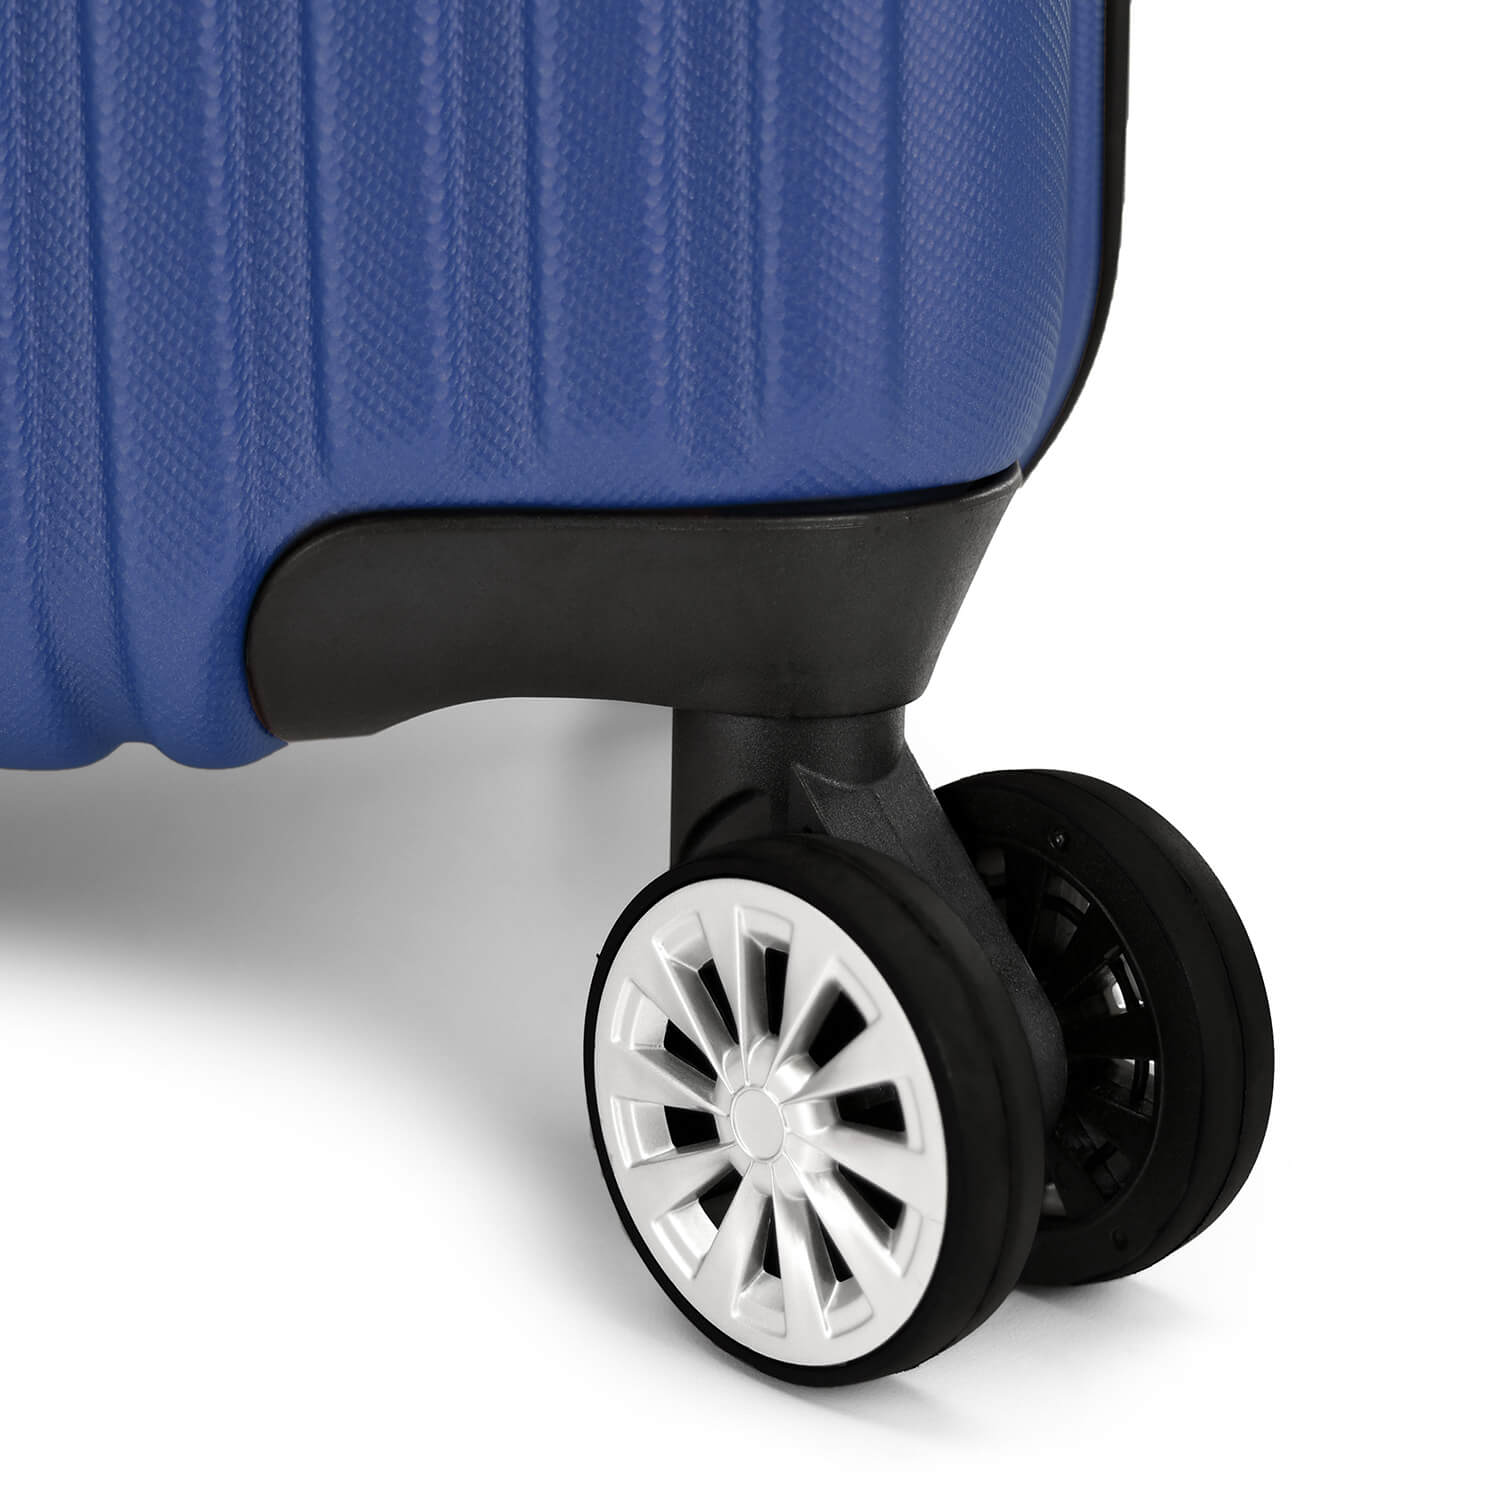 An image of a blue luggage and its wheels.